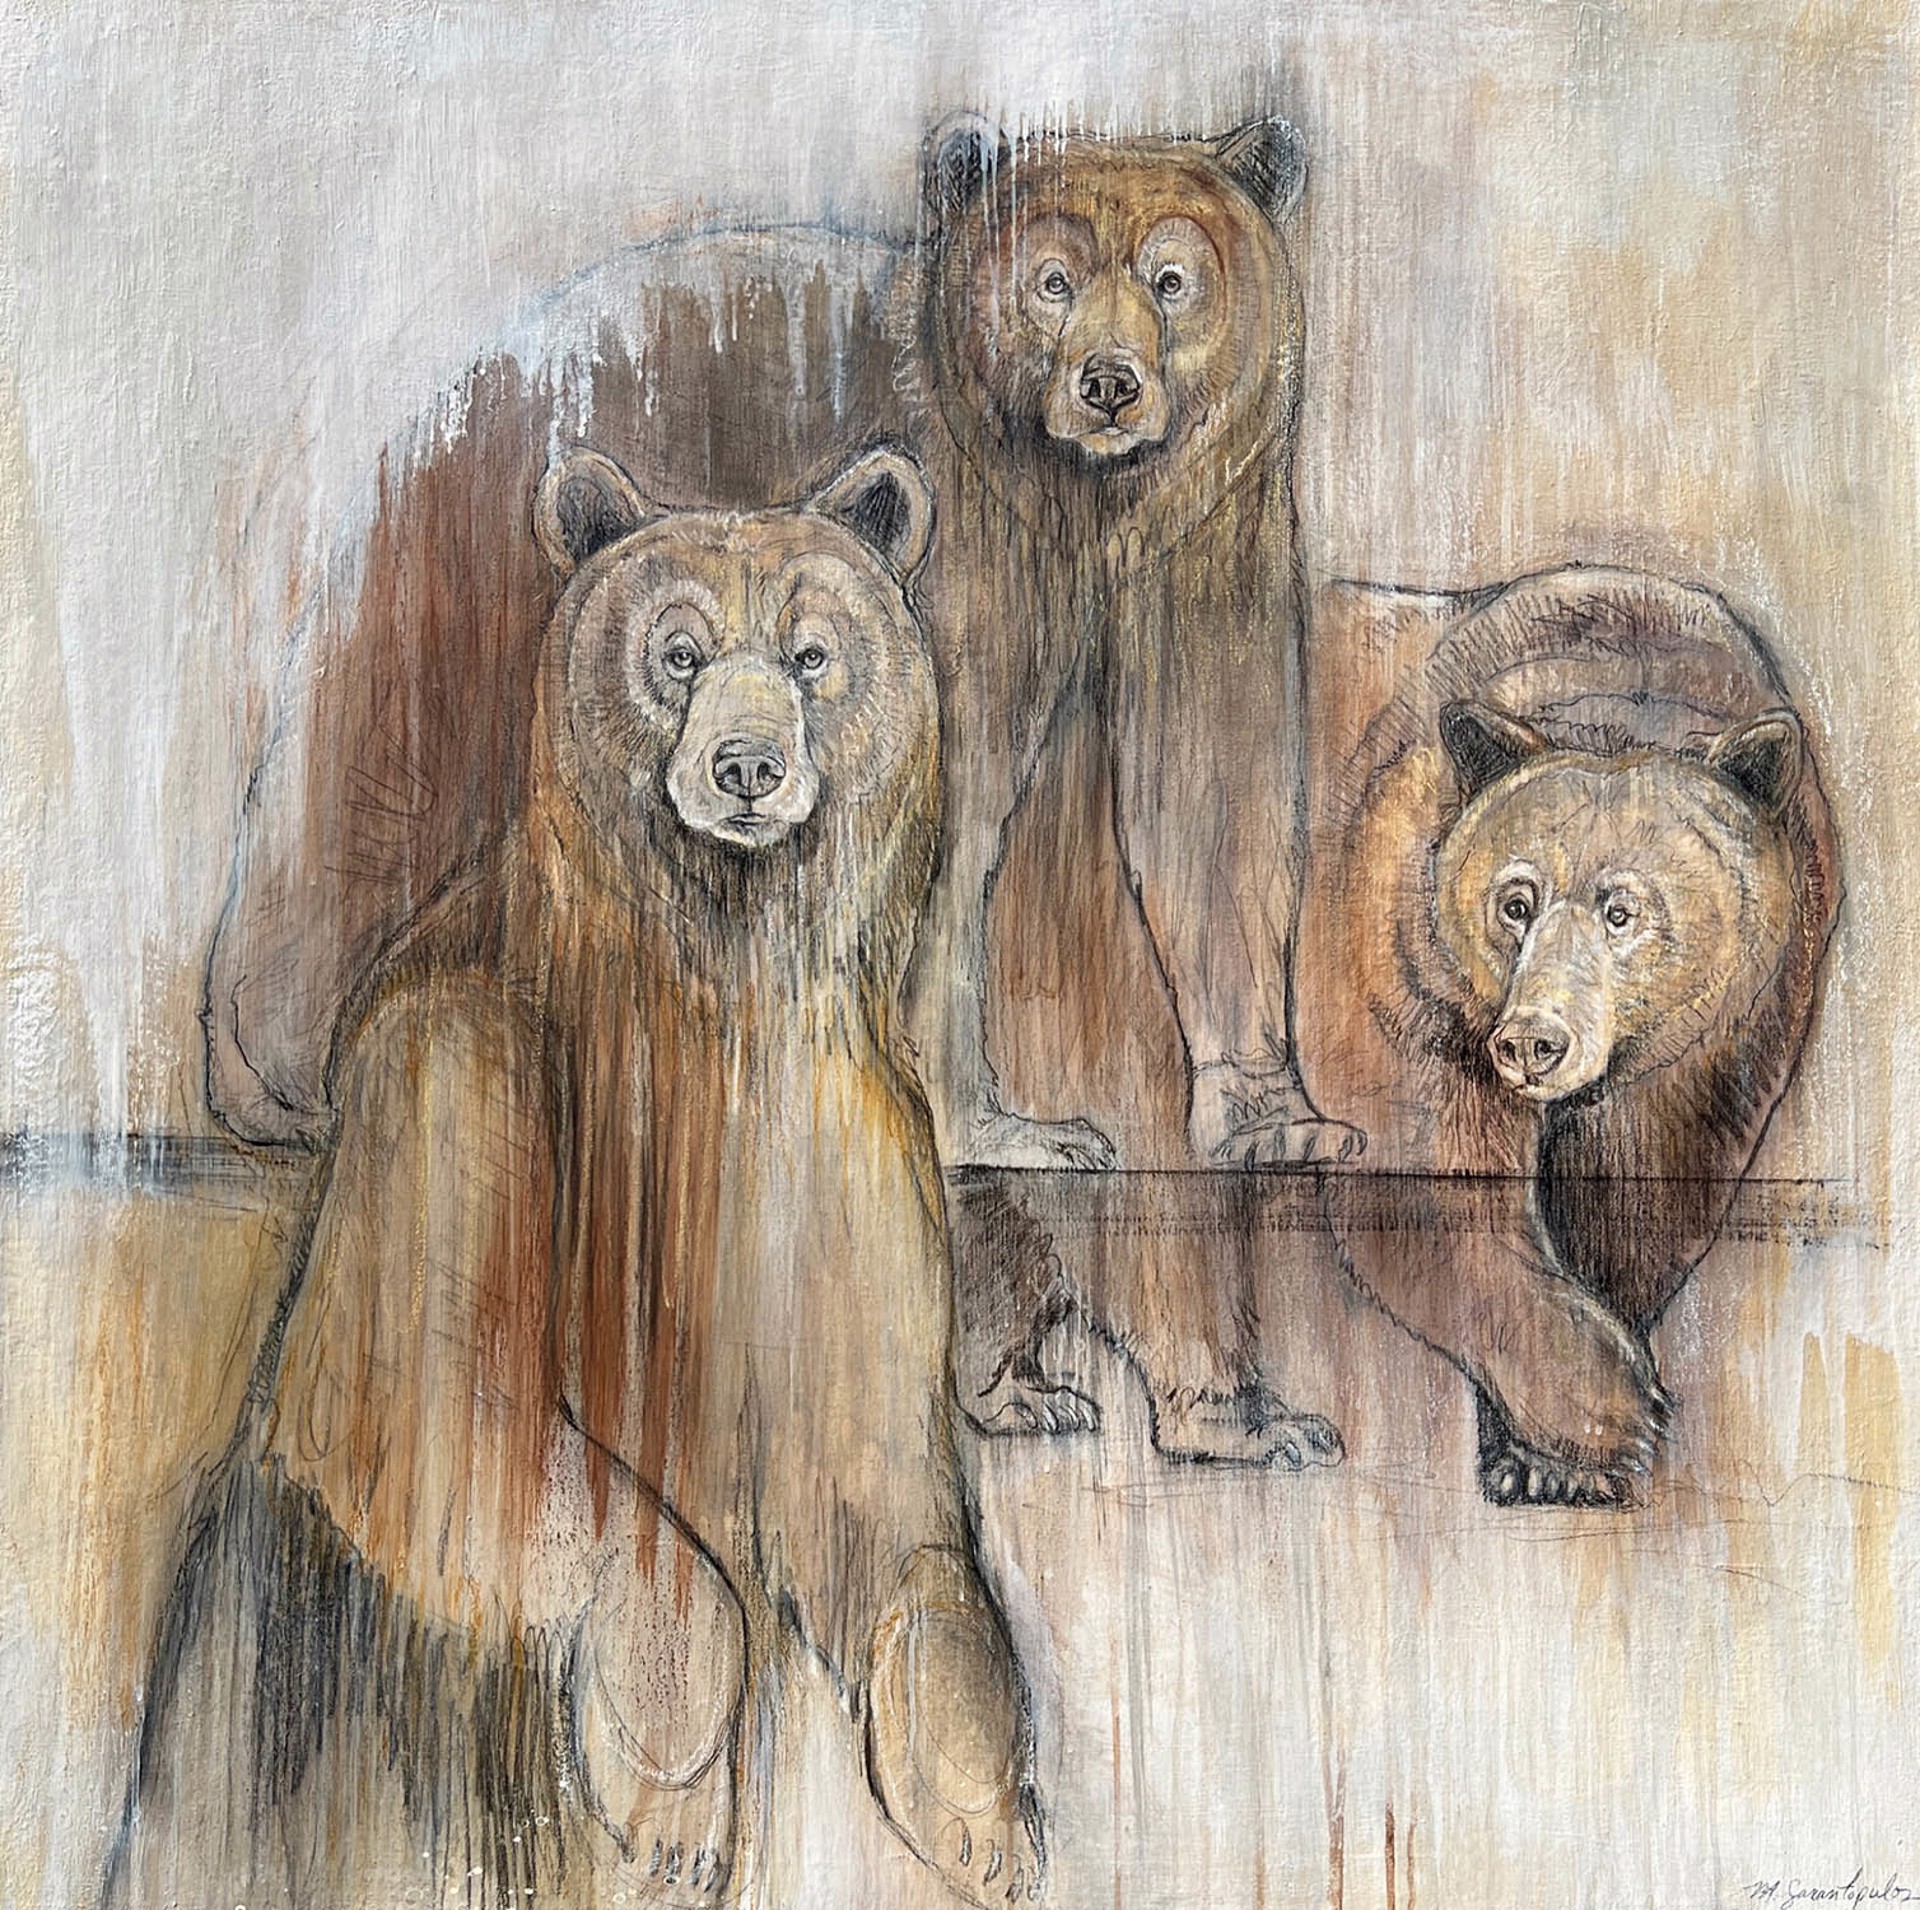 Original Mixed Media Artwork Featuring Three Grizzly Bears Sketched Onto Abstract Neutral Background With Dripping Details